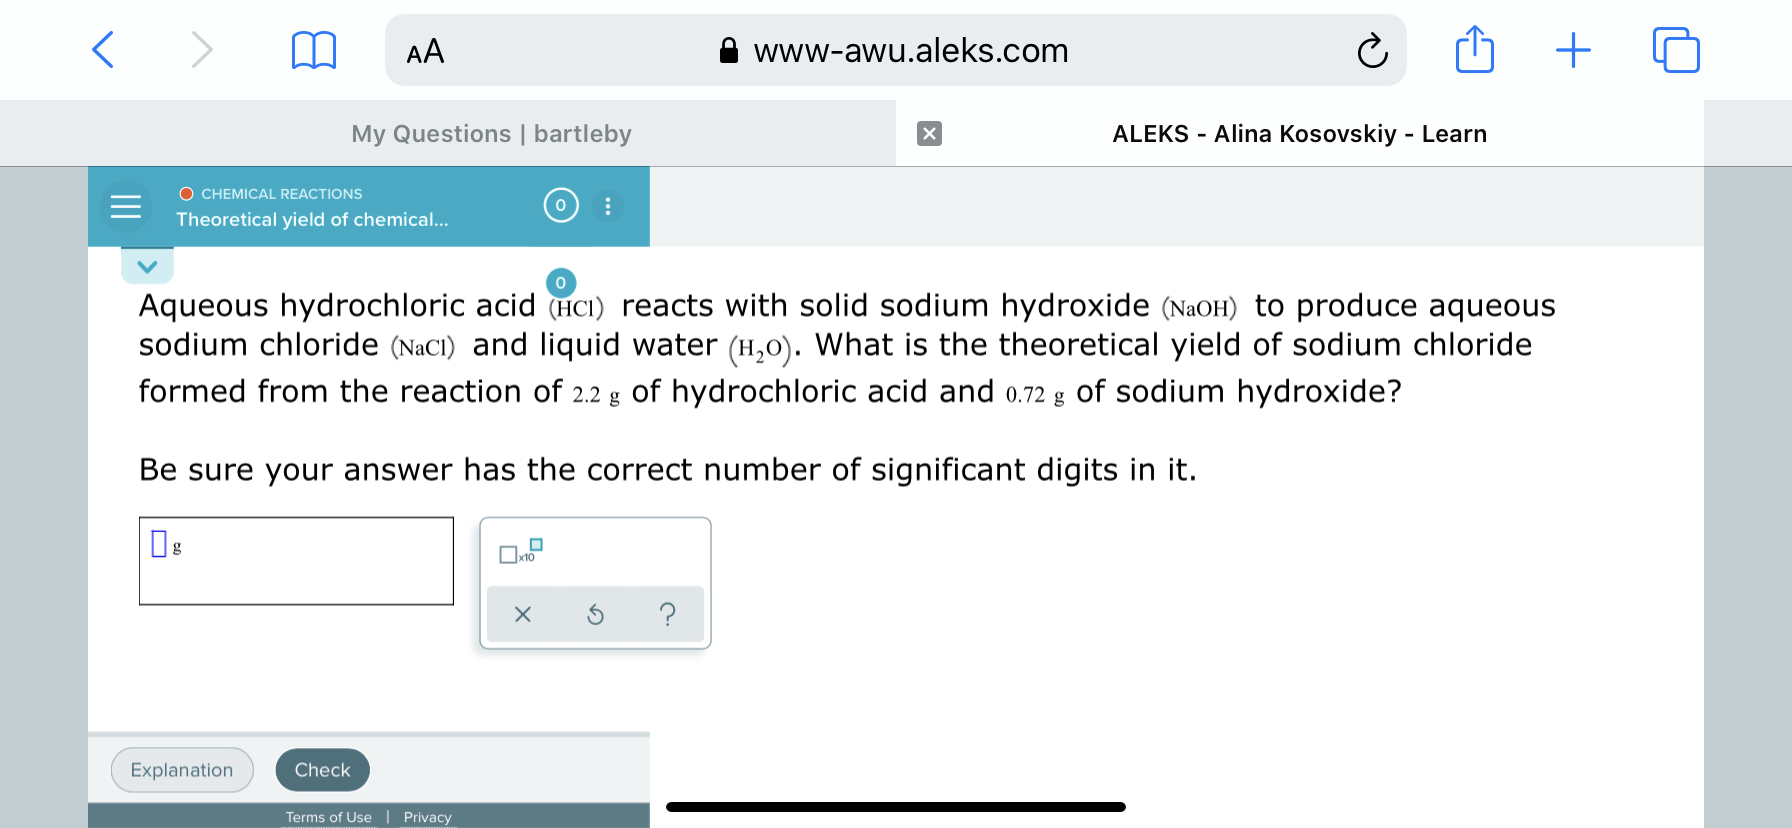 Aqueous hydrochloric acid (HCI) reacts with solid sodium hydroxide (N2OH) to produce aqueous
sodium chloride (NaCI) and liquid water (H,0). What is the theoretical yield of sodium chloride
formed from the reaction of 2.2 g of hydrochloric acid and 0.72 g of sodium hydroxide?
